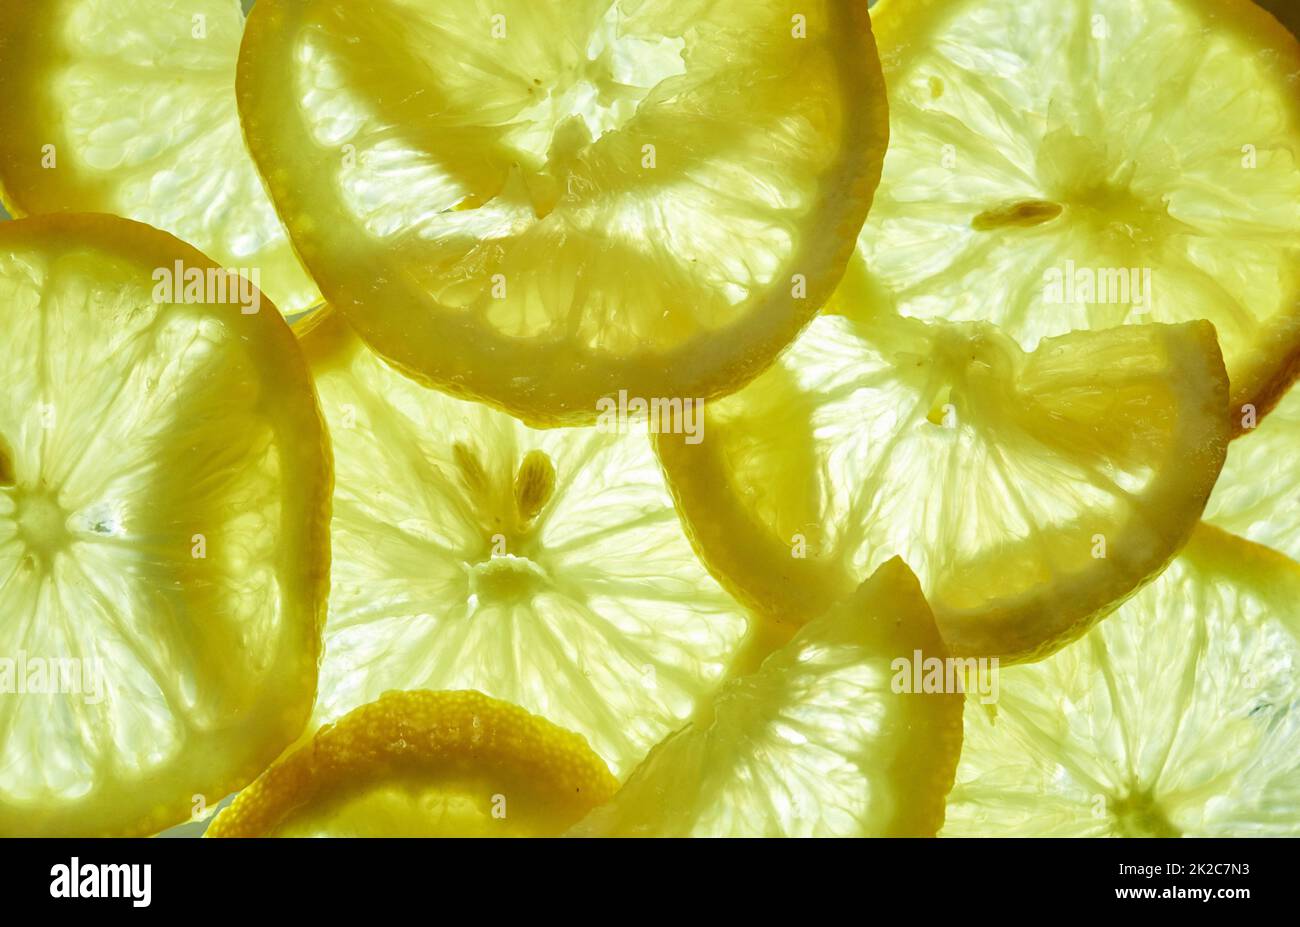 A bit of zest will get you feeling your best. Shot of a group of freshly cut lemon slices. Stock Photo